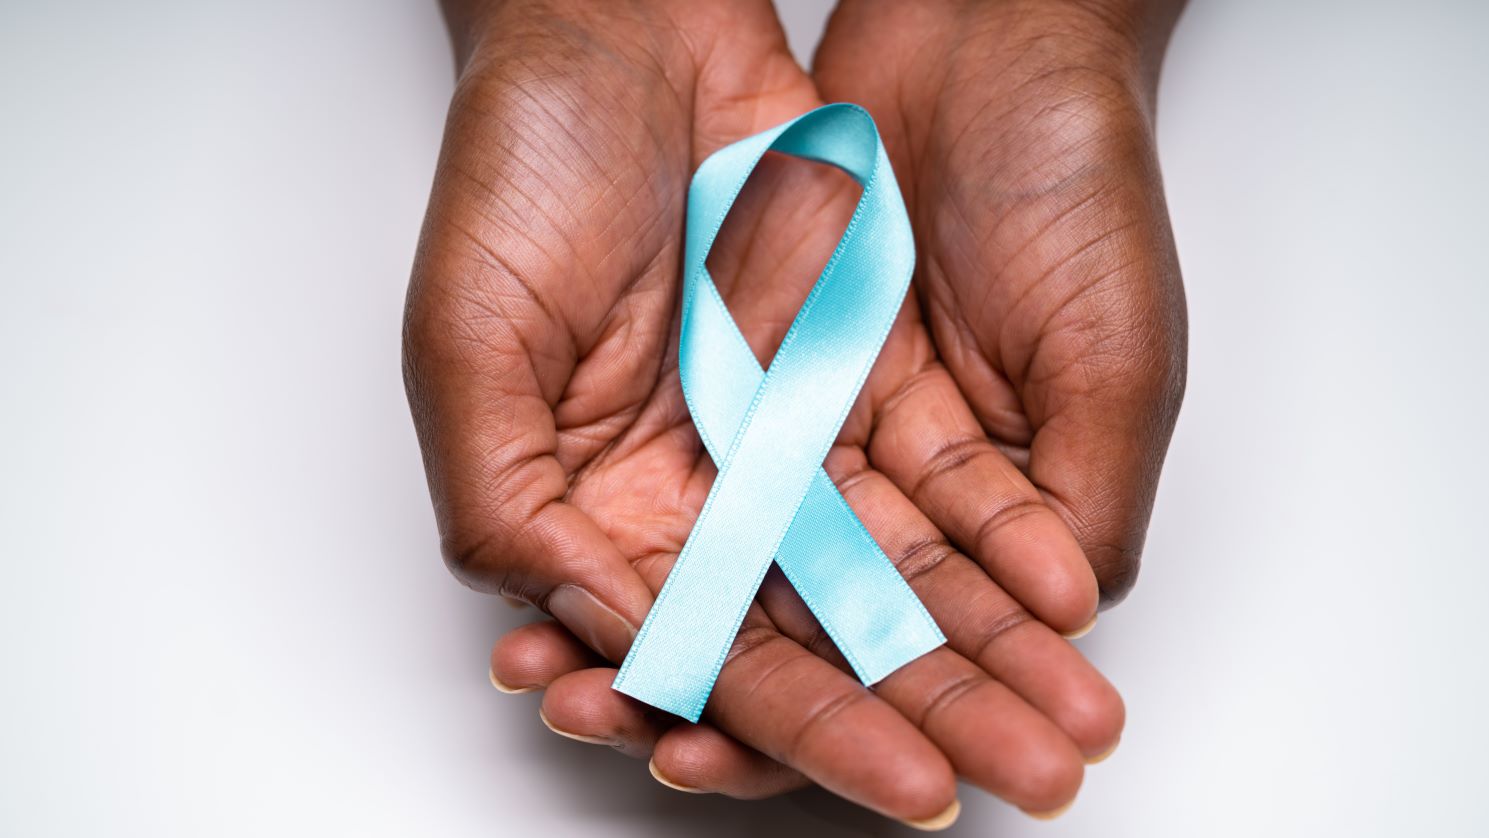 Cervical cancer is the most common cancer and leading cause of cancer-related mortality in Tanzanian women.